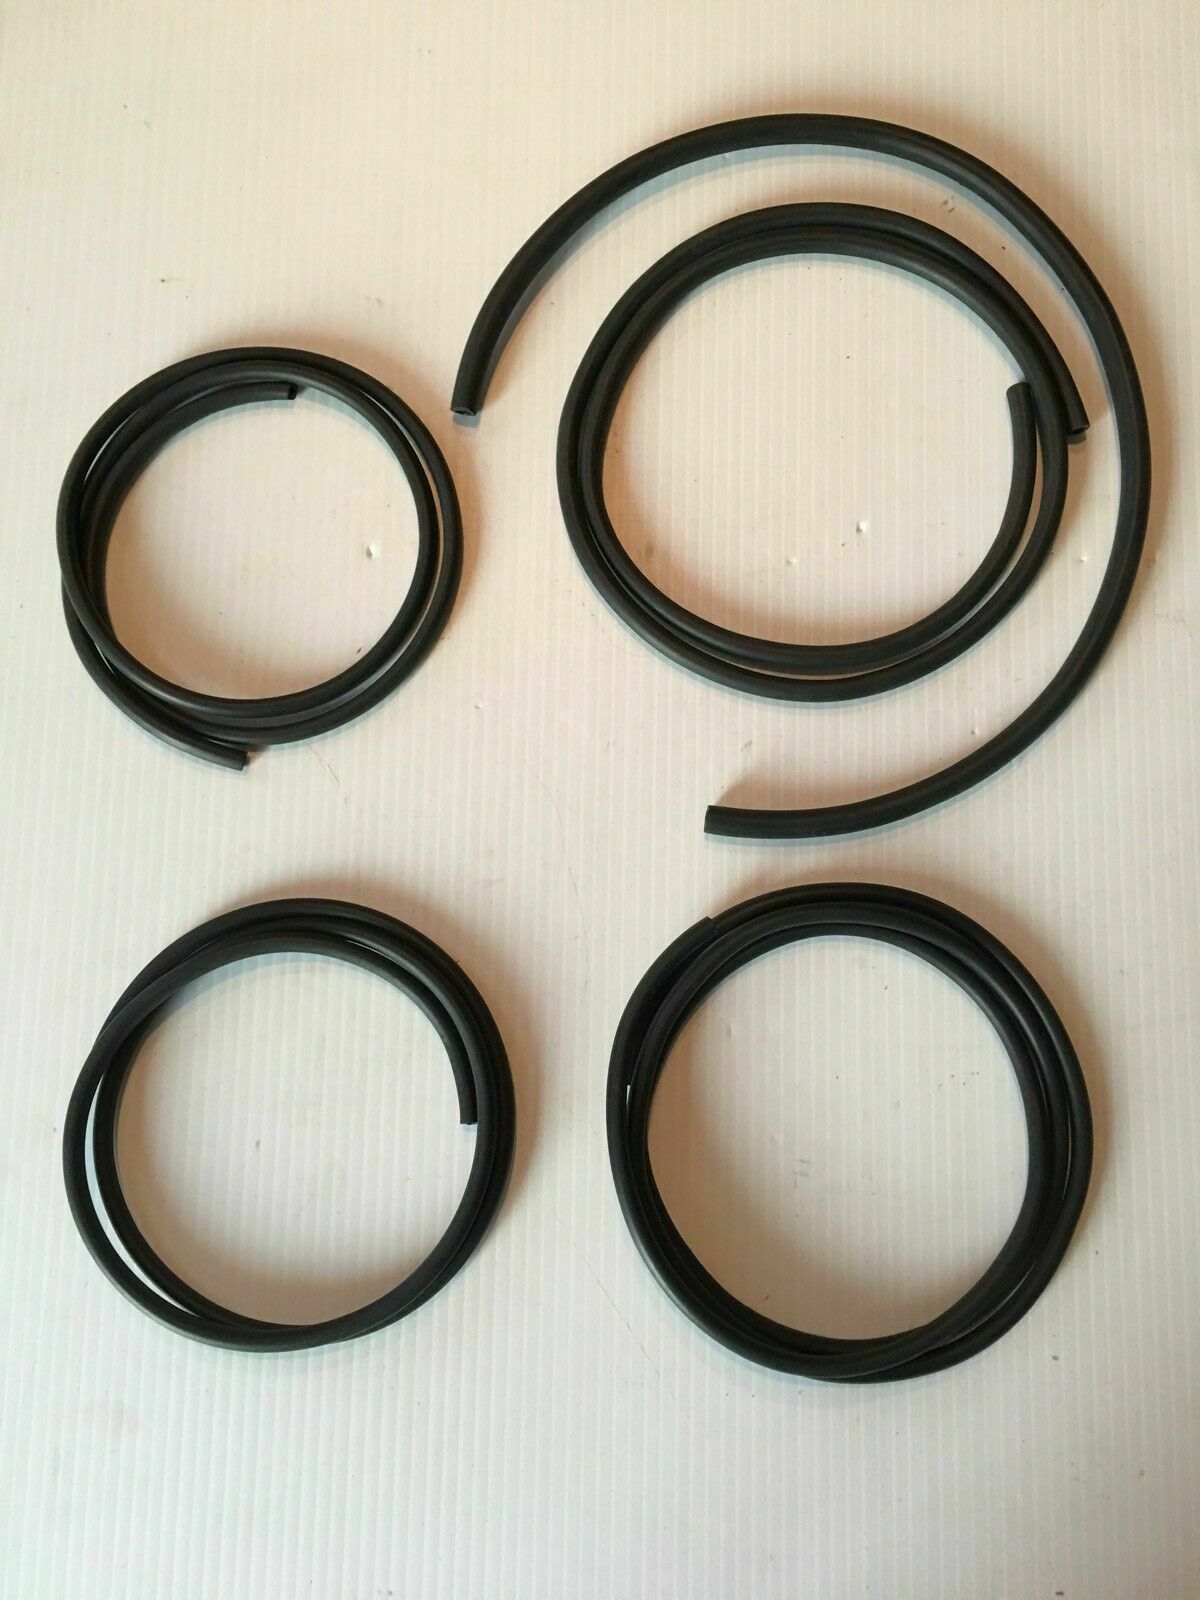 Windshield Washer Parts: NEW 1958 1959 Chevy GMC Truck Windshield Washer Hose Kit With Push Button Wipers